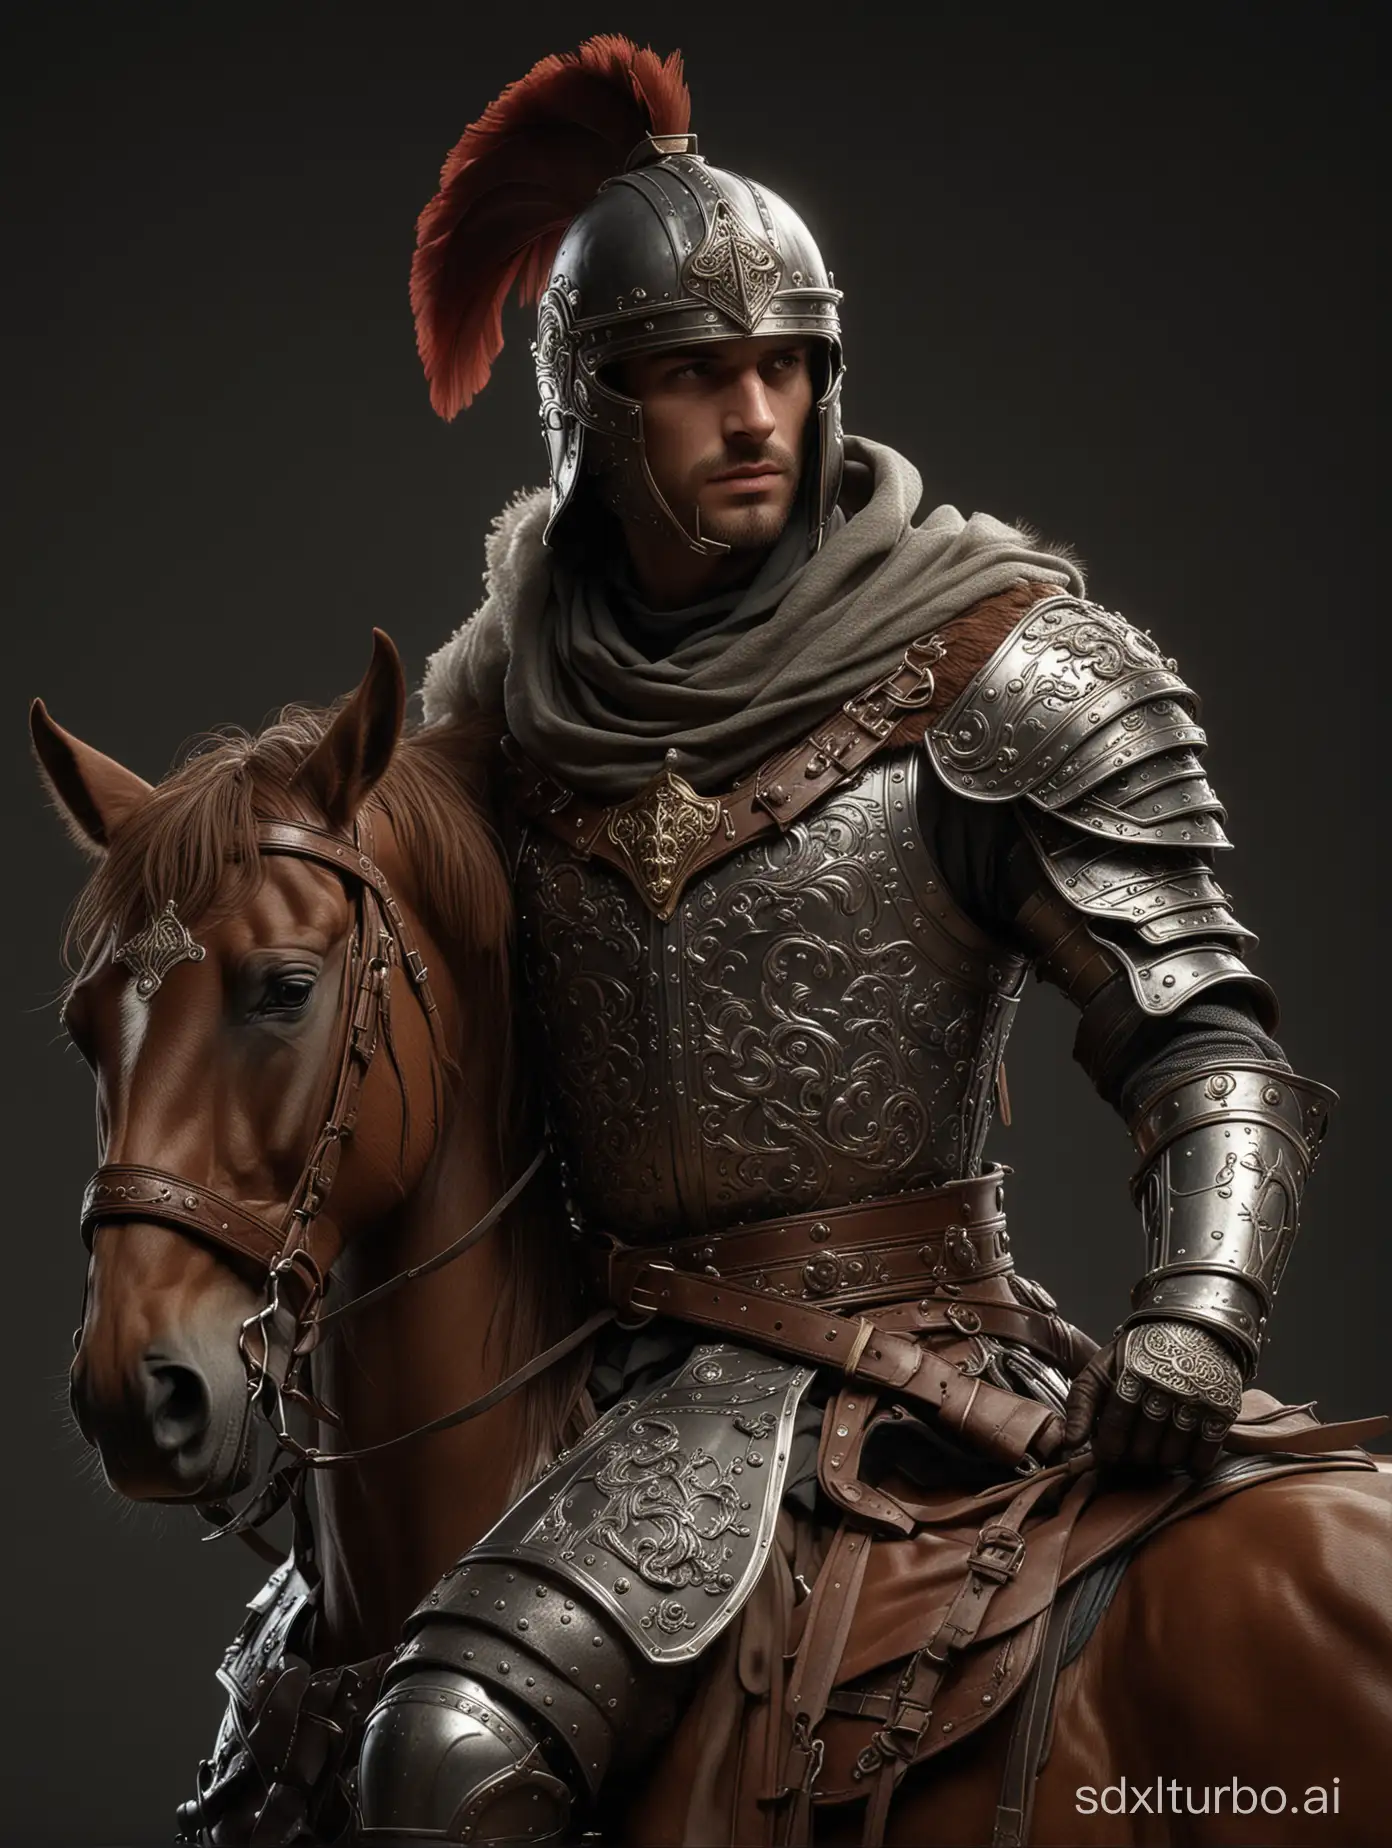 Handsome-Knight-in-Armor-Riding-Brown-Horse-Photorealistic-Concept-Art